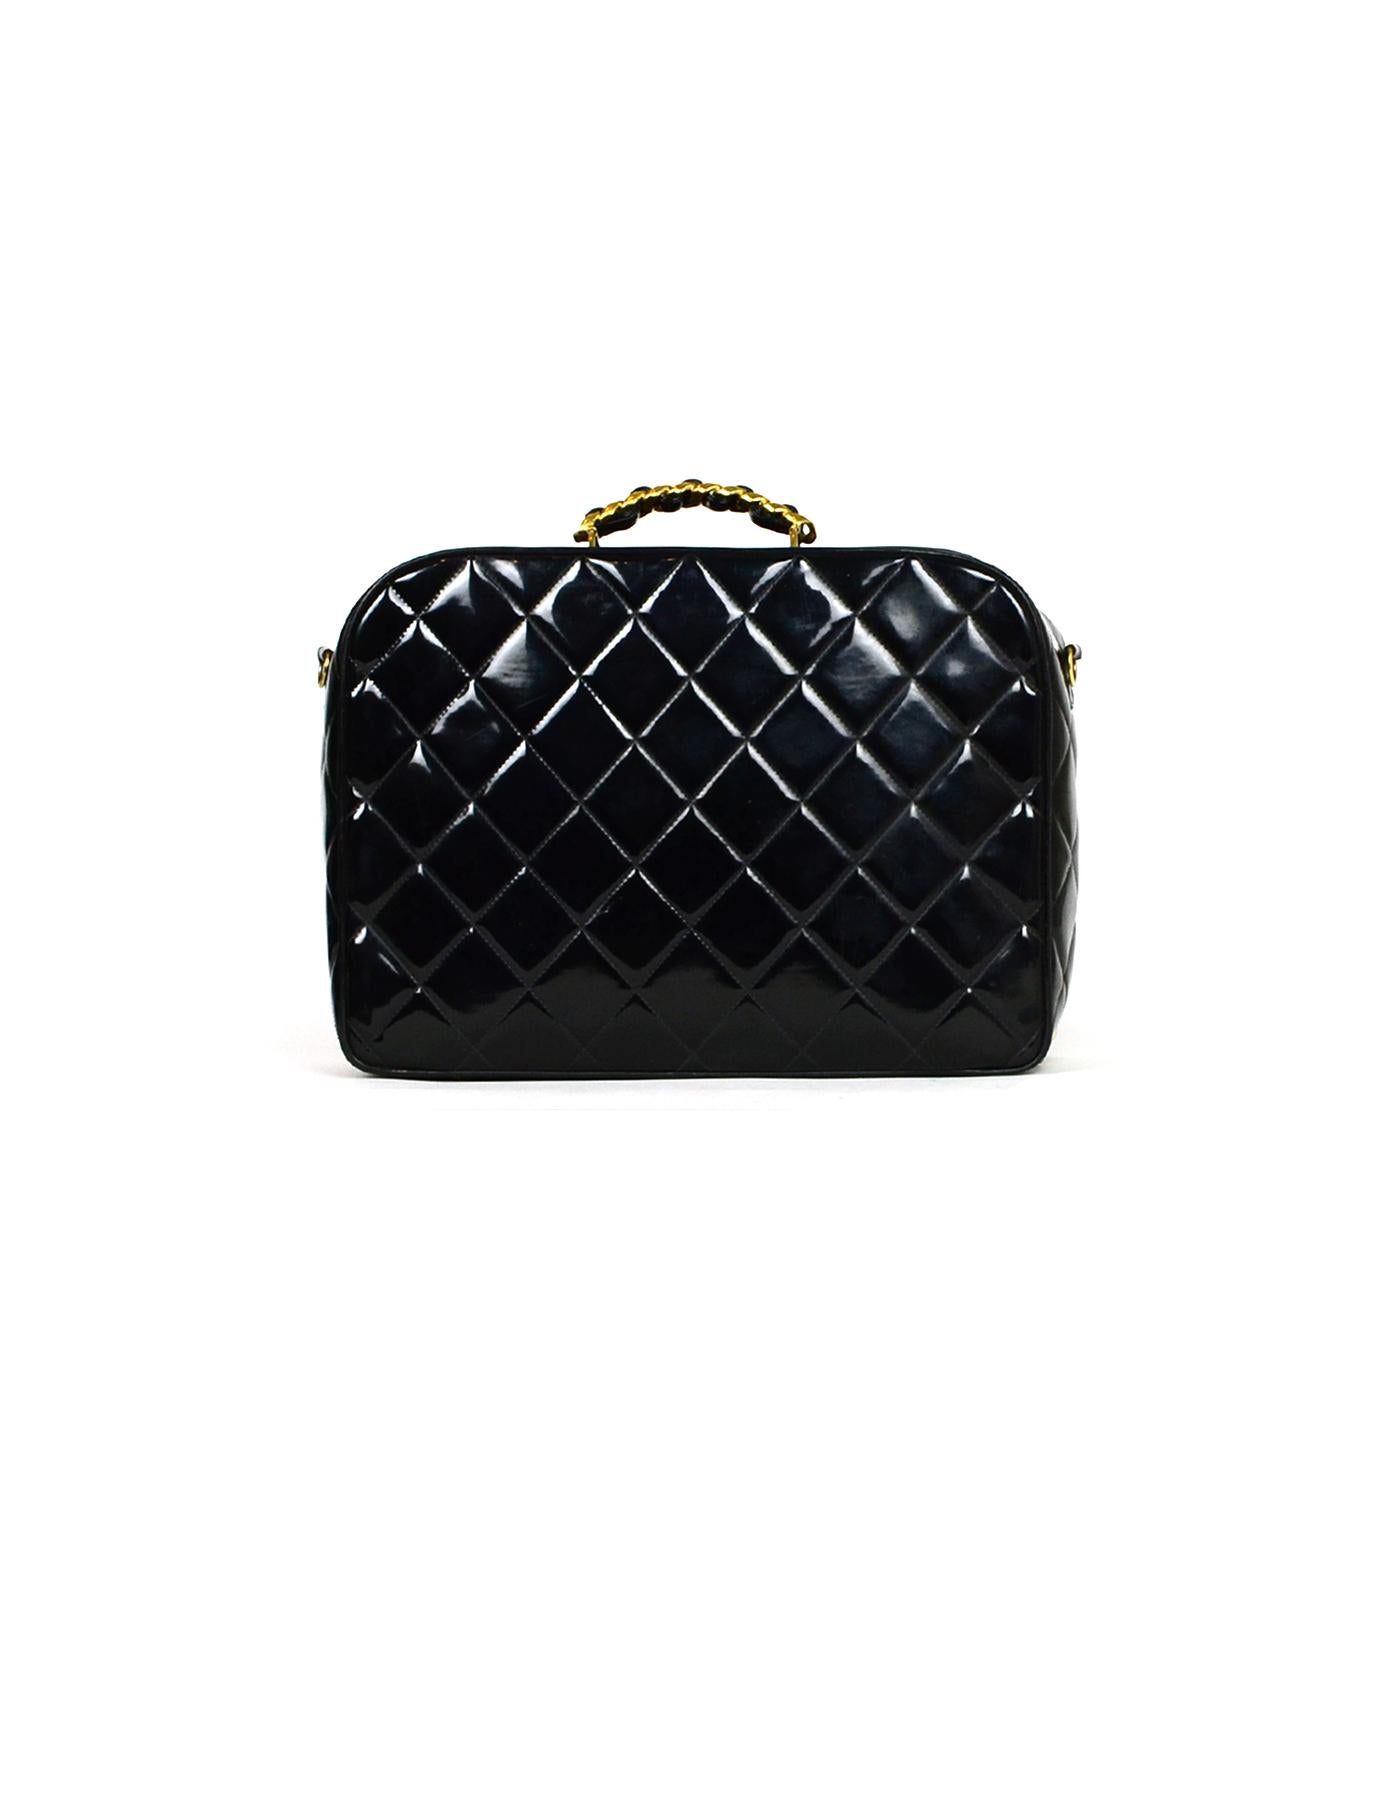 Chanel Vintage Black Patent Zip Around Bag

Made In: France
Year of Production: 1994-1996
Color: Black
Hardware: Goldtone
Materials: Patent Leather
Lining: Leather
Closure/Opening: Zip around
Exterior Pockets: None
Interior Pockets: One zip pocket,